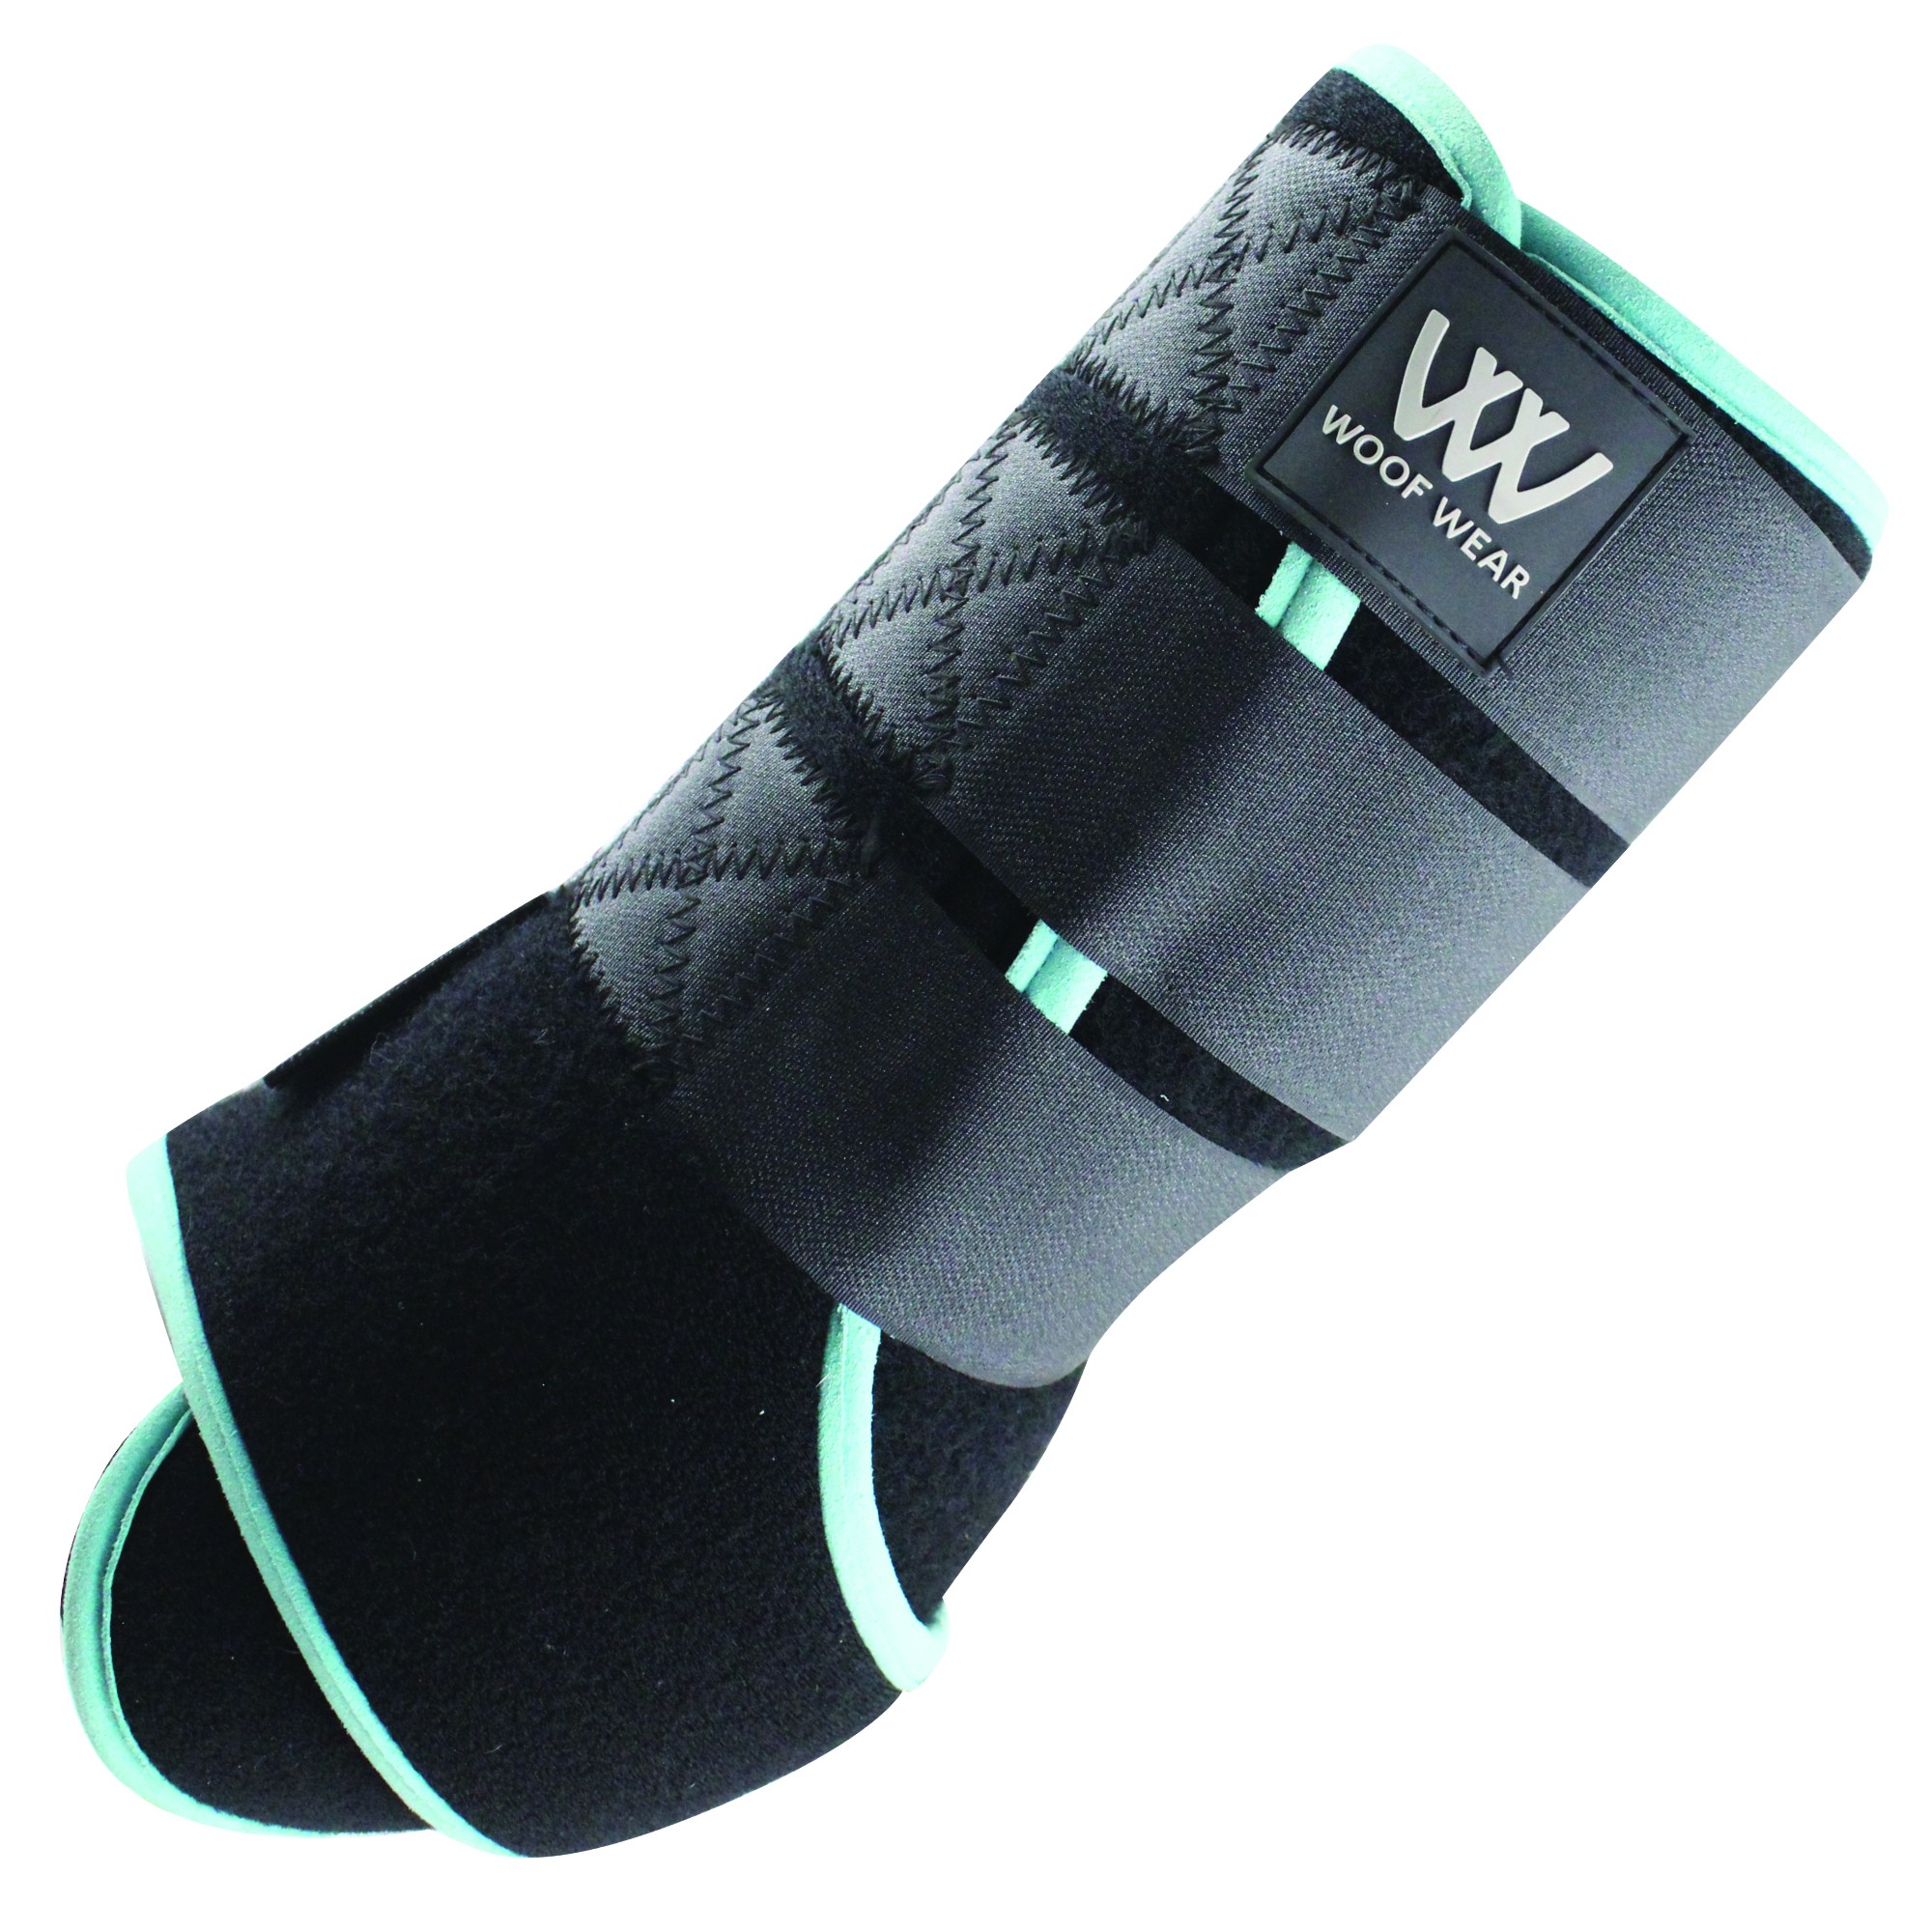 Cooling gaiters incl. therapy packs.